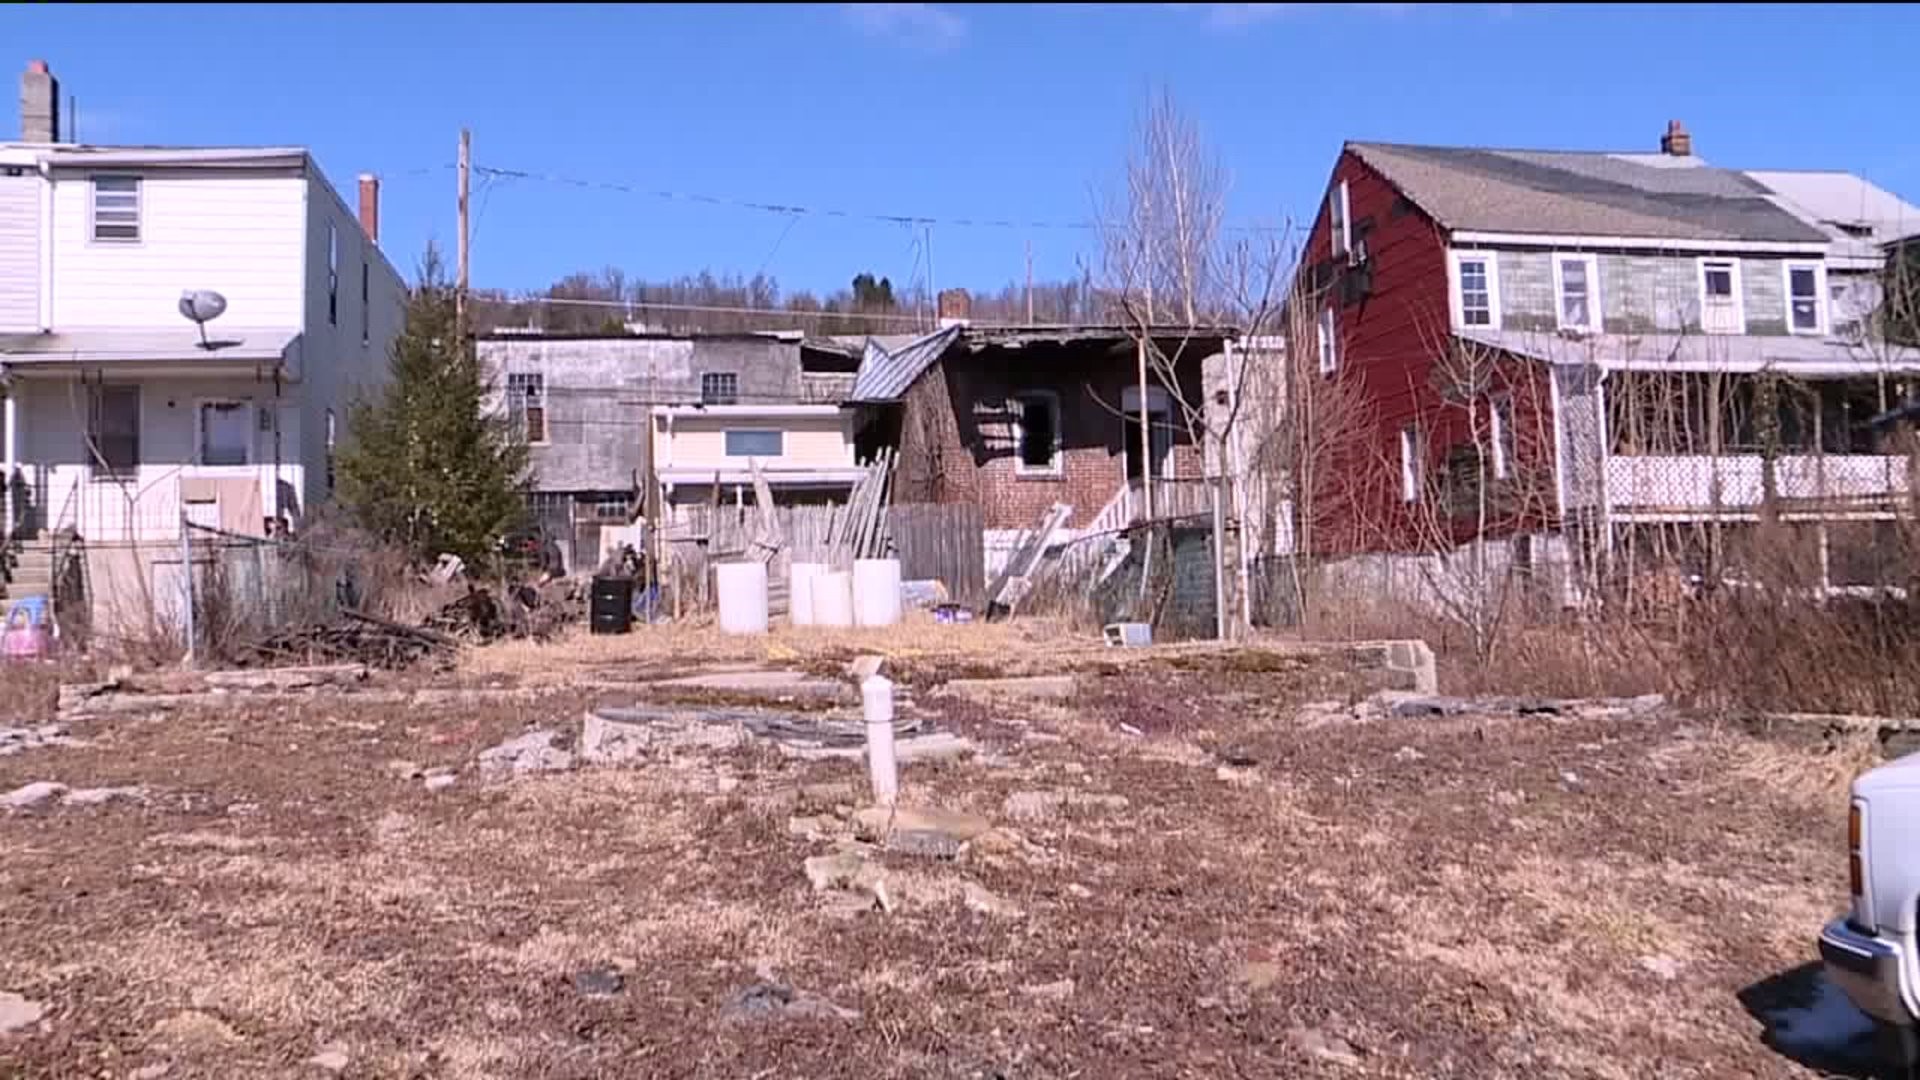 Gov. Wolf`s Administration Takes a Look at Blight